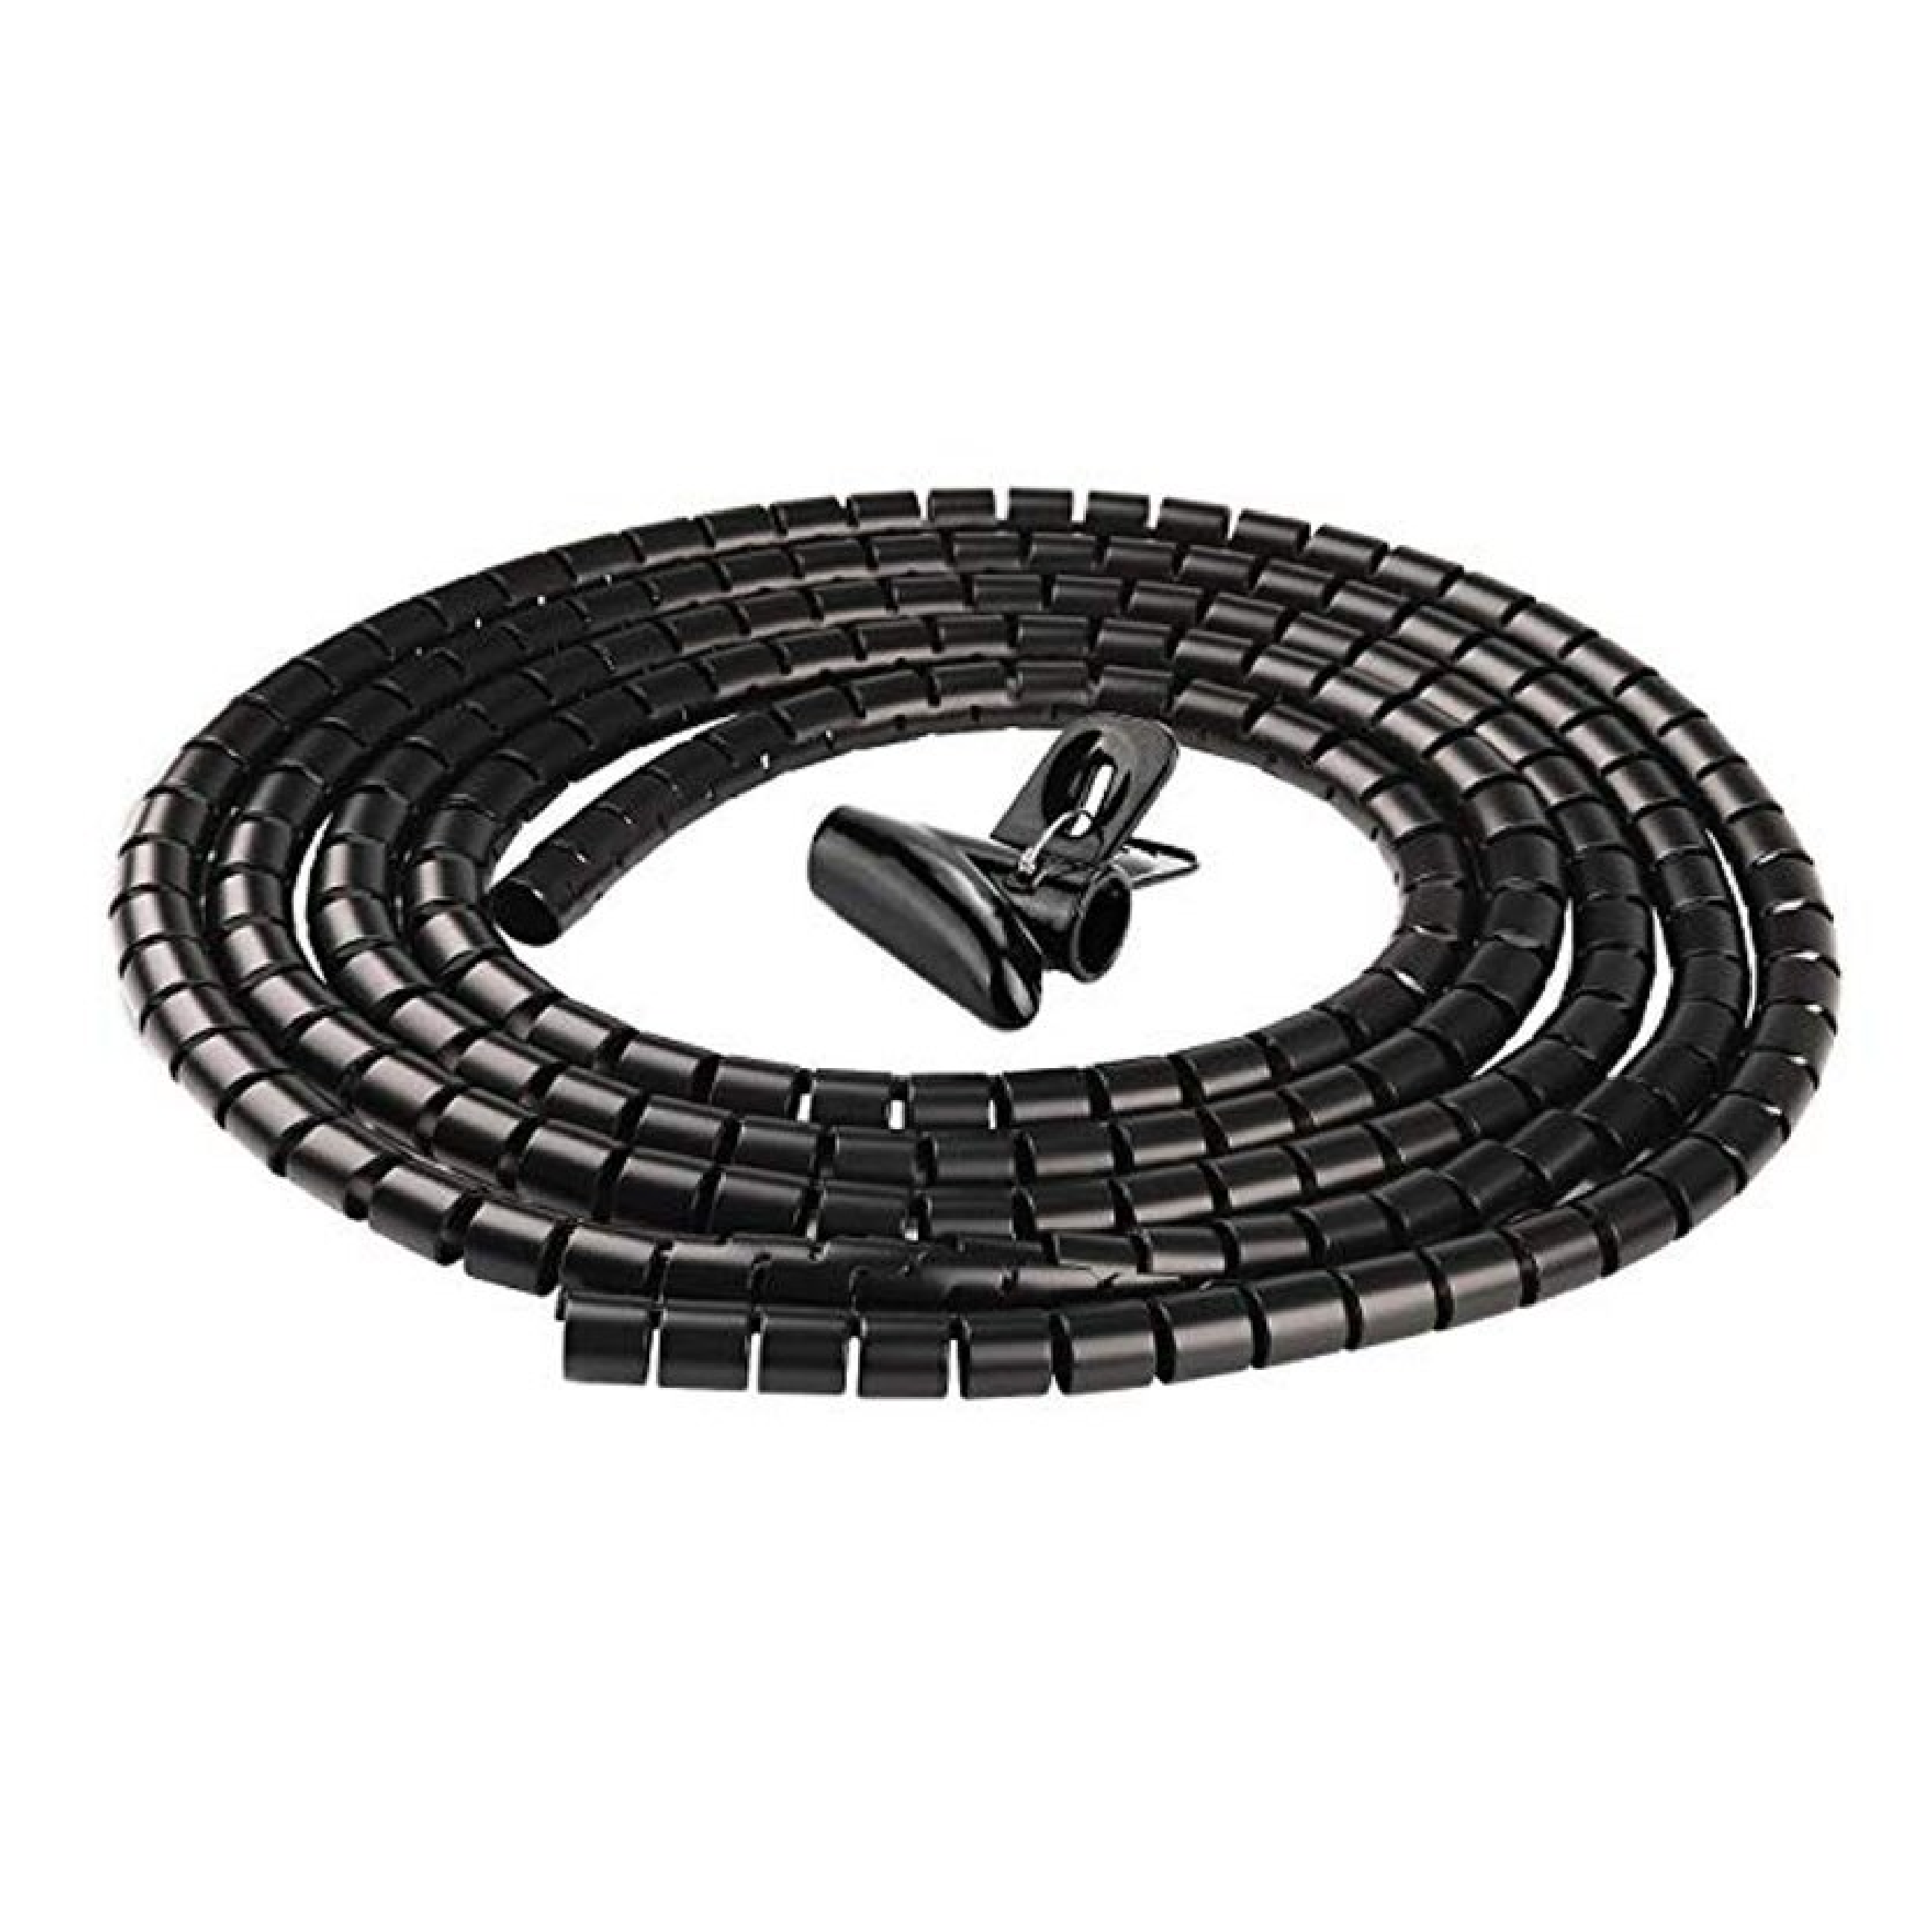 Cable Cover, 2m Flexible Electrical Cable Management, Cable Management For  Home And Office, 2m - 16mm, Black